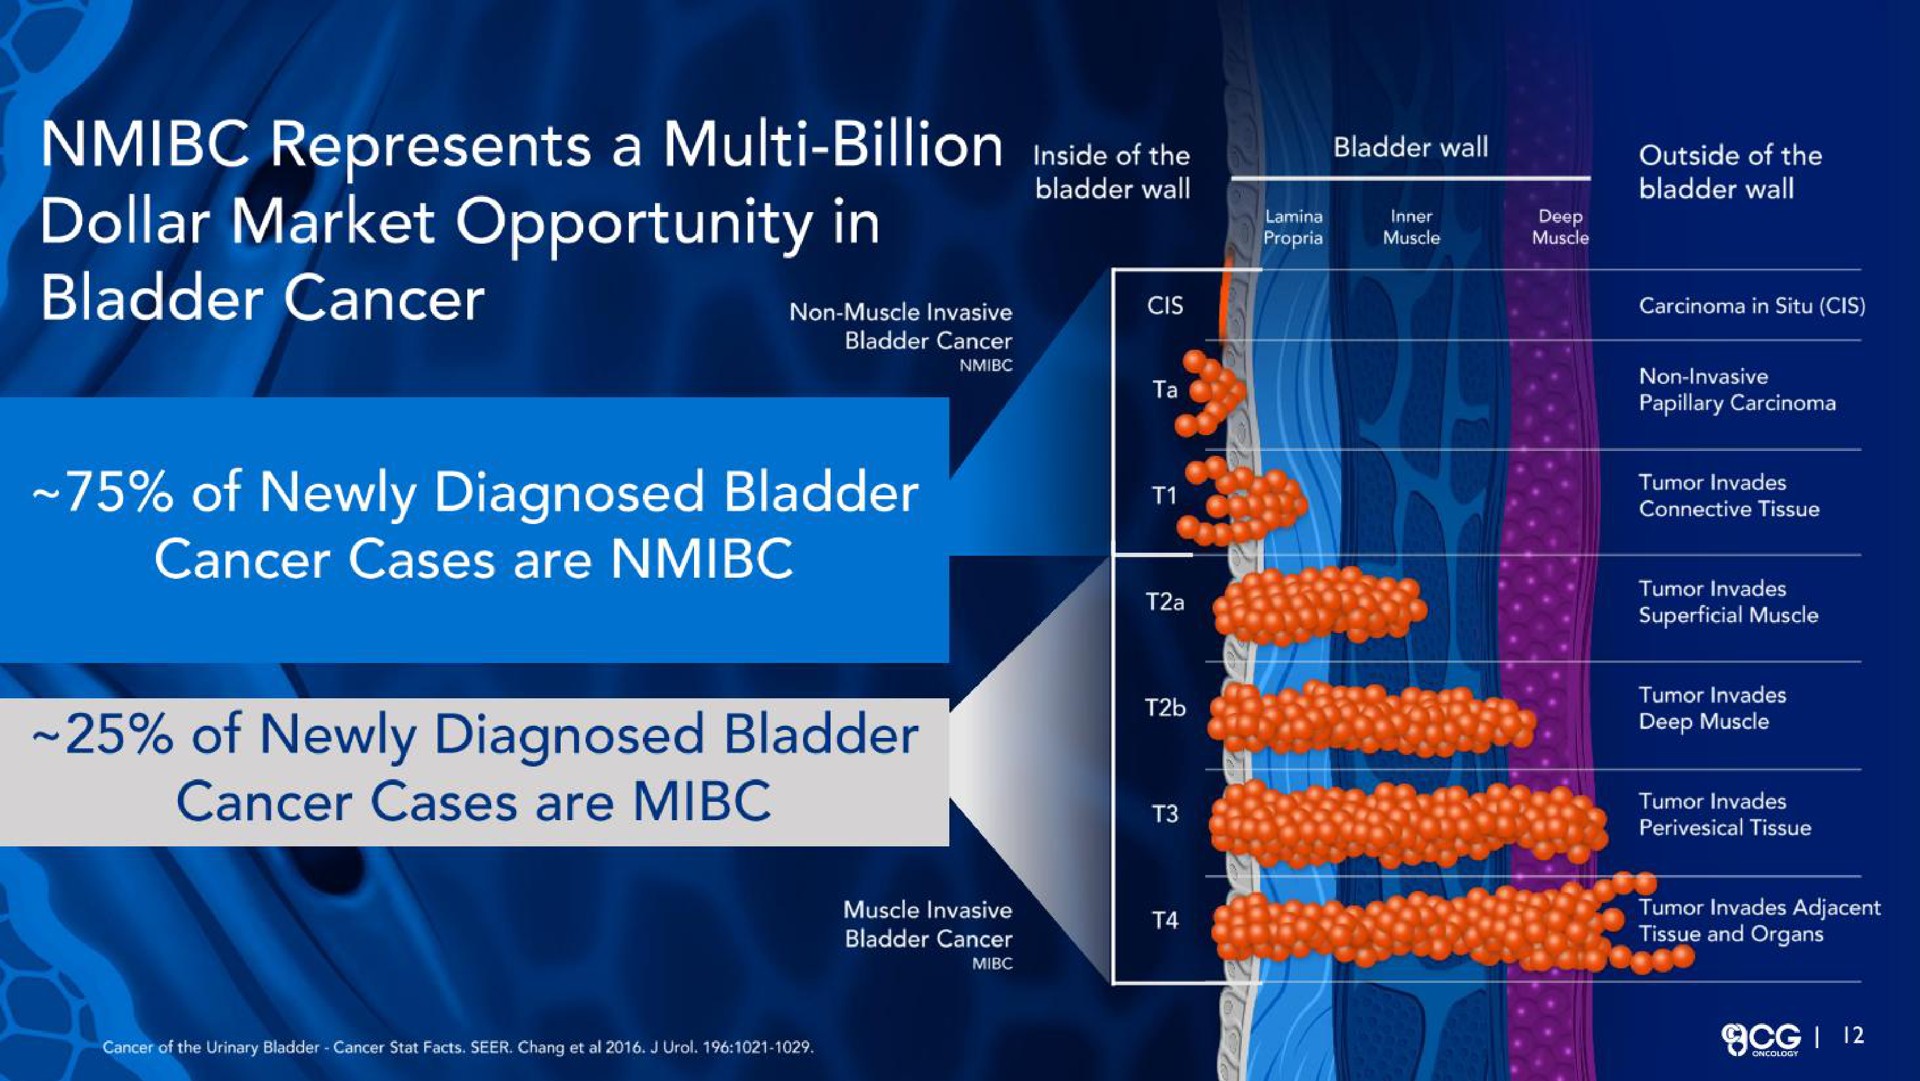 represents a billion the dollar market opportunity in bladder cancer a a of newly diagnosed bladder cancer cases are of newly diagnosed bladder cancer cases are sere eer a ses | CG Oncology